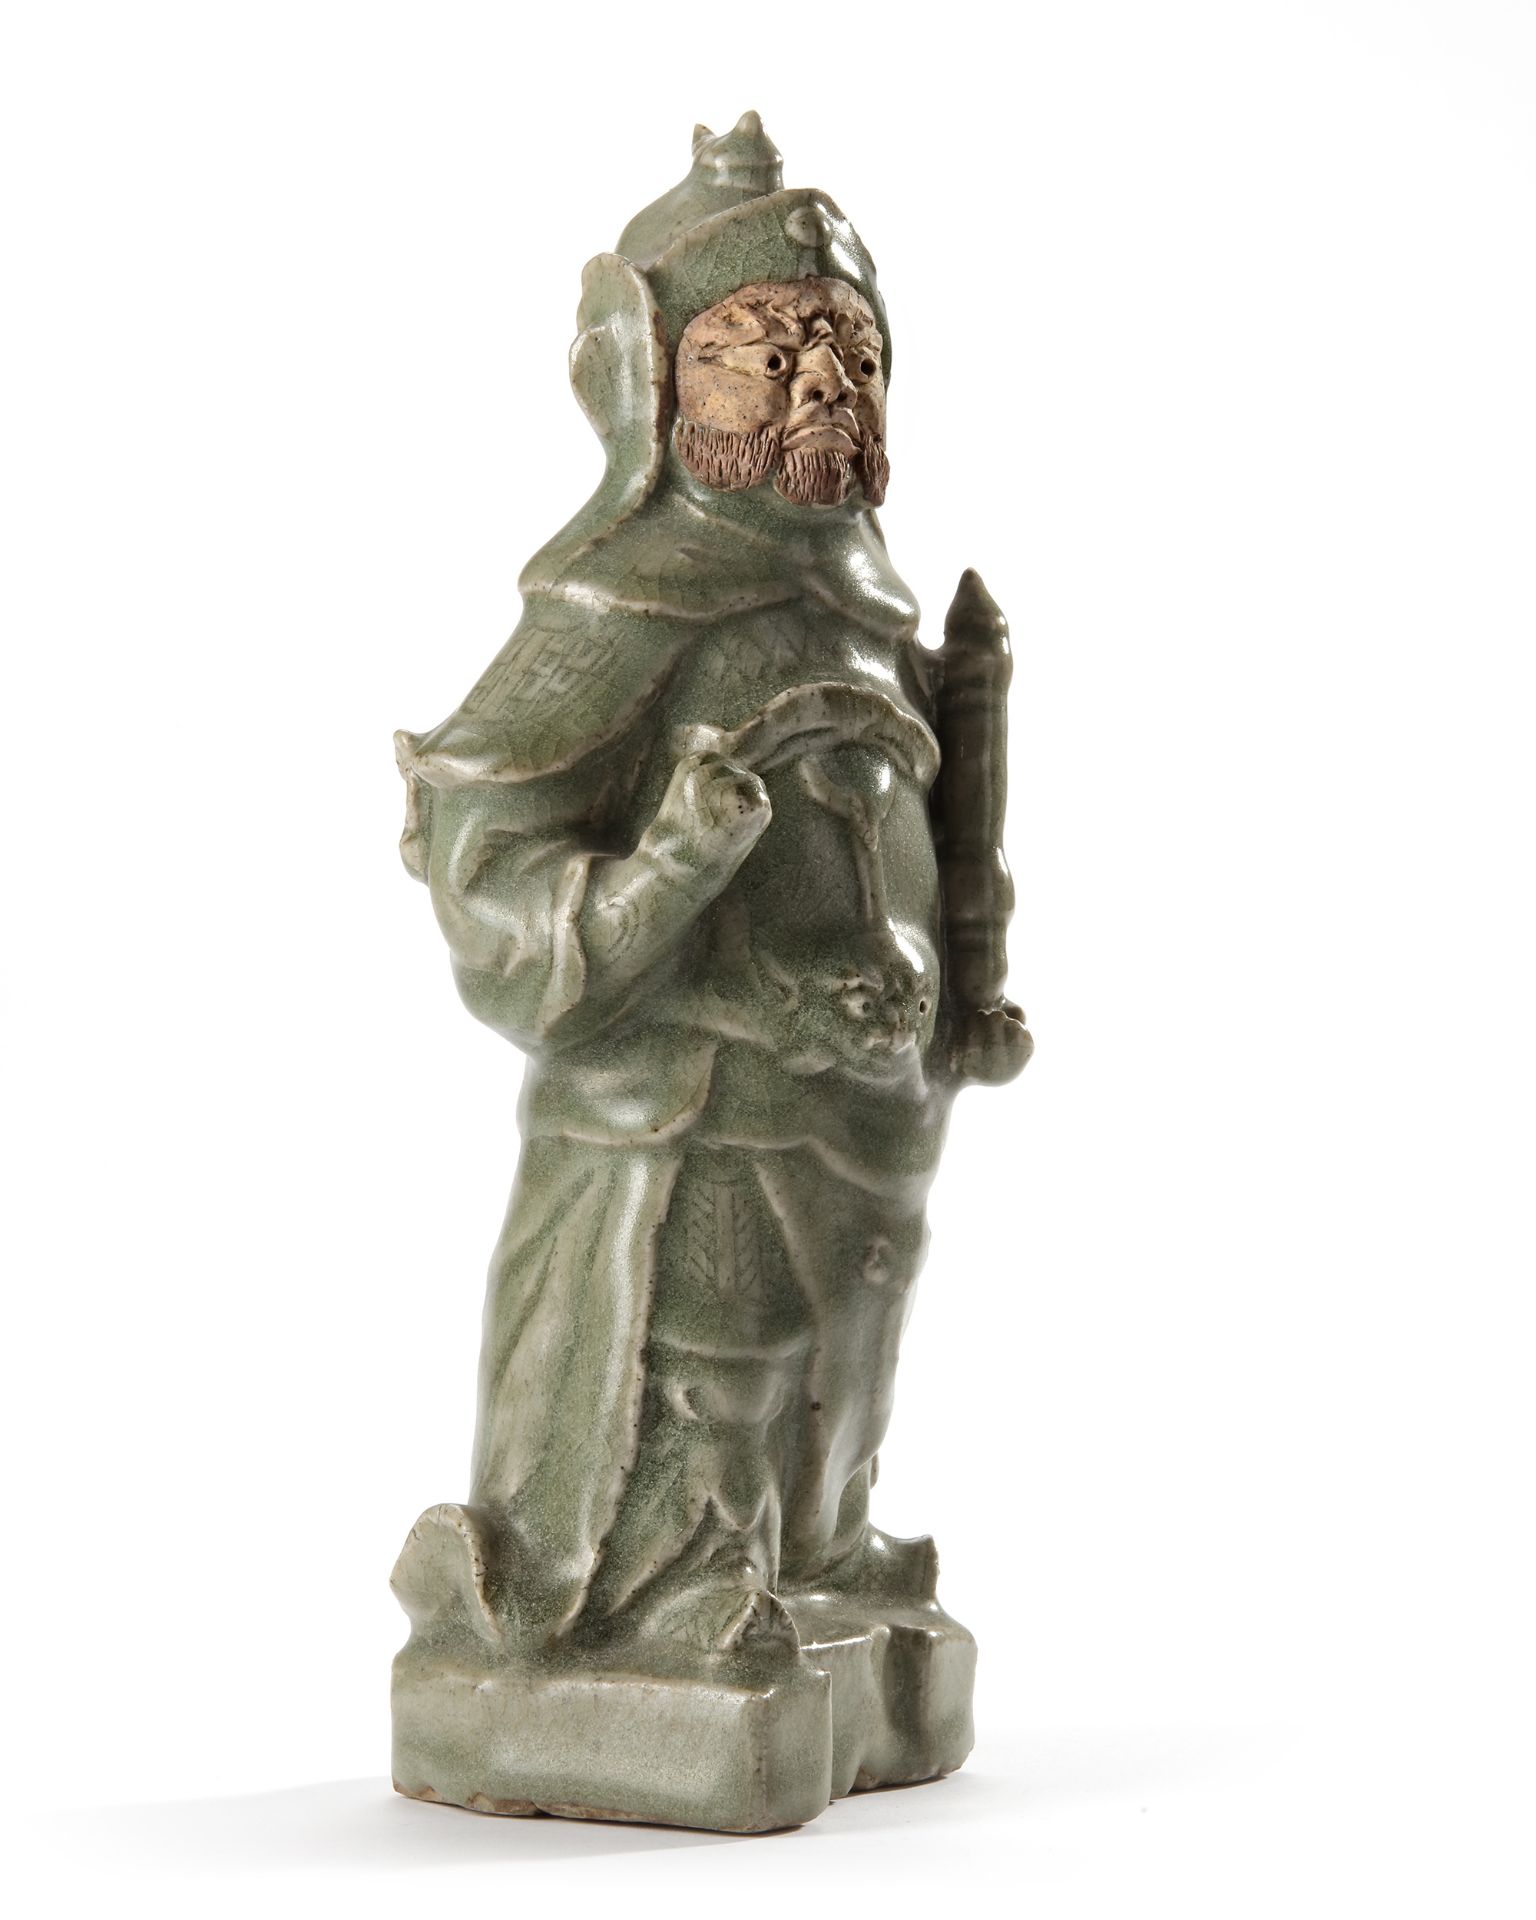 A CHINESE CELADON GUAN YU FIGURE, MING DYNASTY, 15TH CENTURY - Image 5 of 6